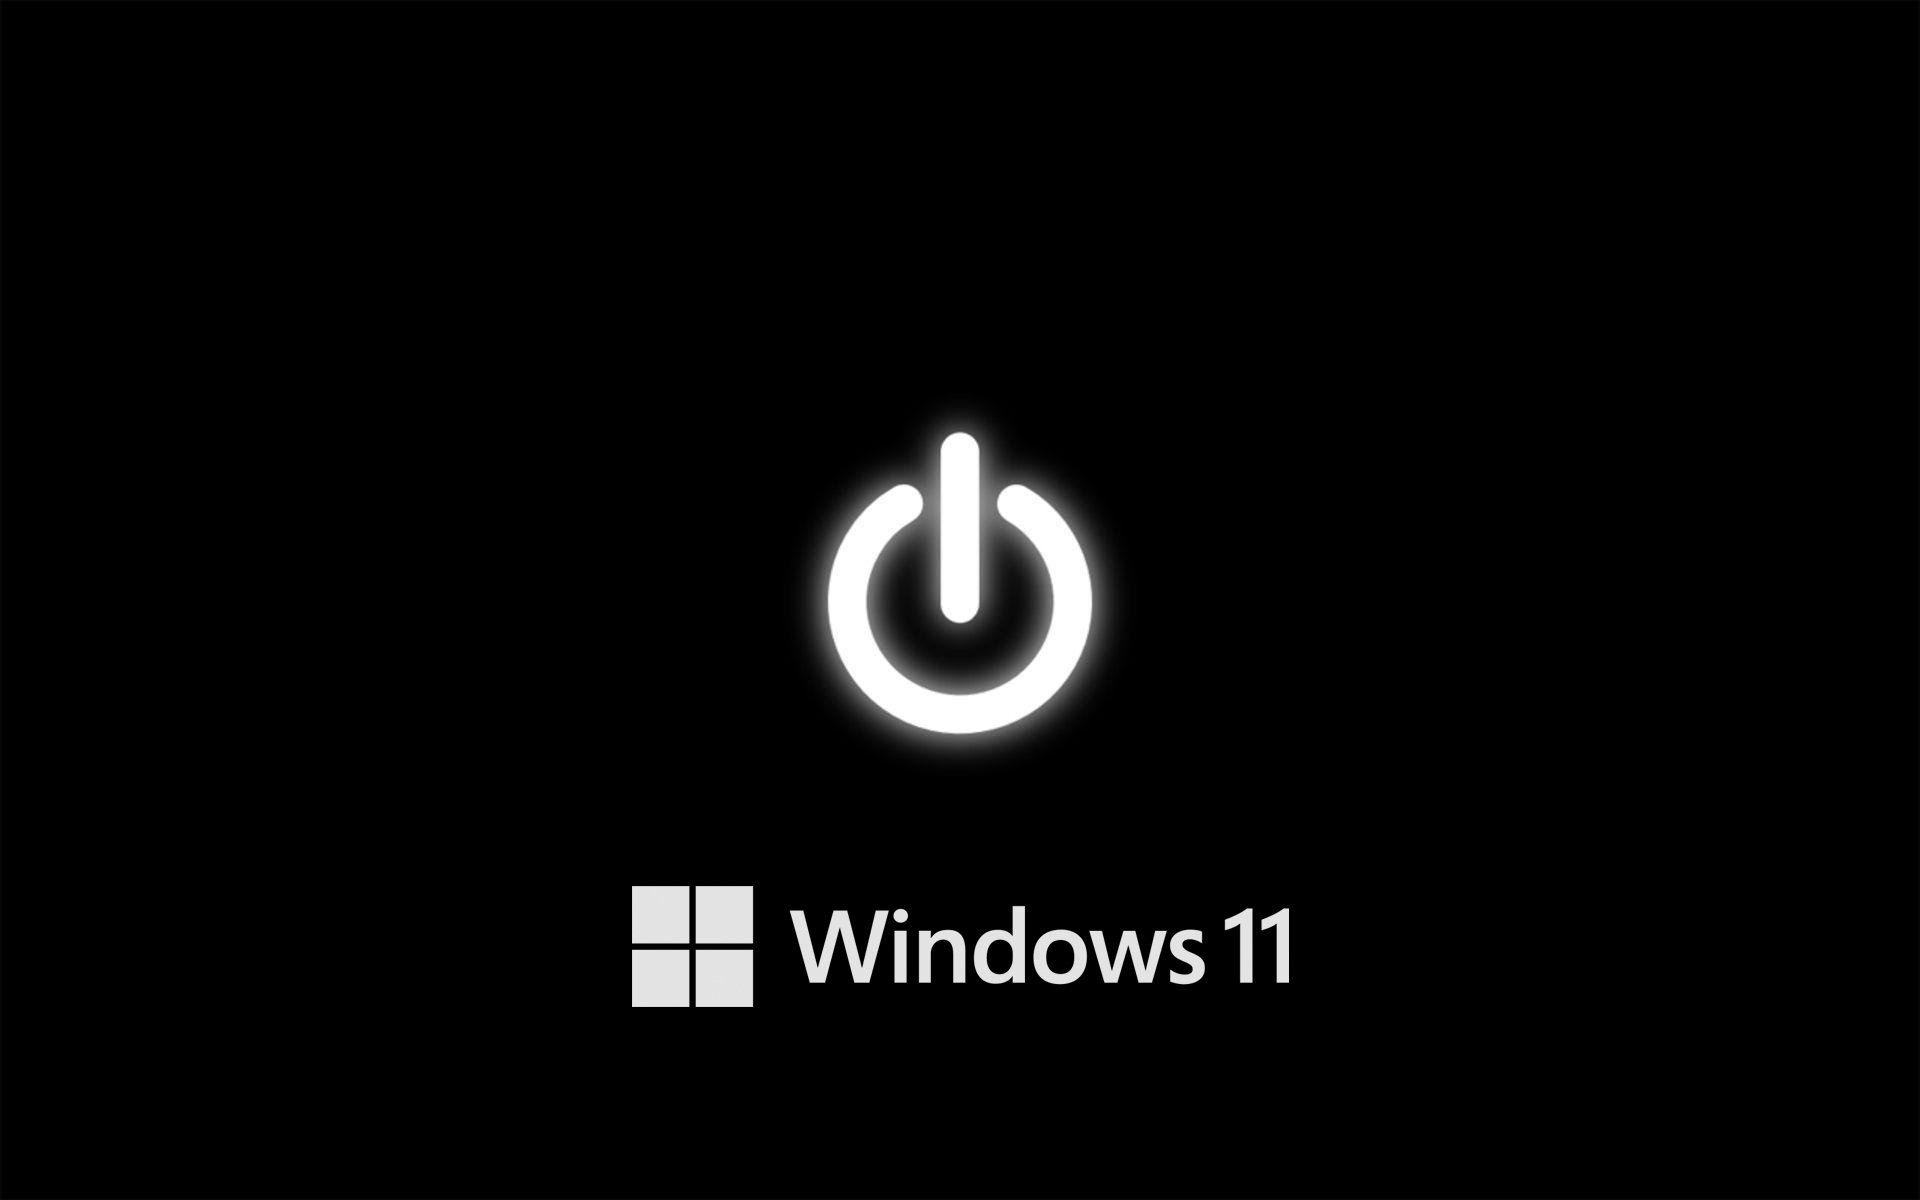 Dark Background for Windows 11 with Power Button and Logo Wallpaper. Wallpaper Download. High Resolution Wallpaper